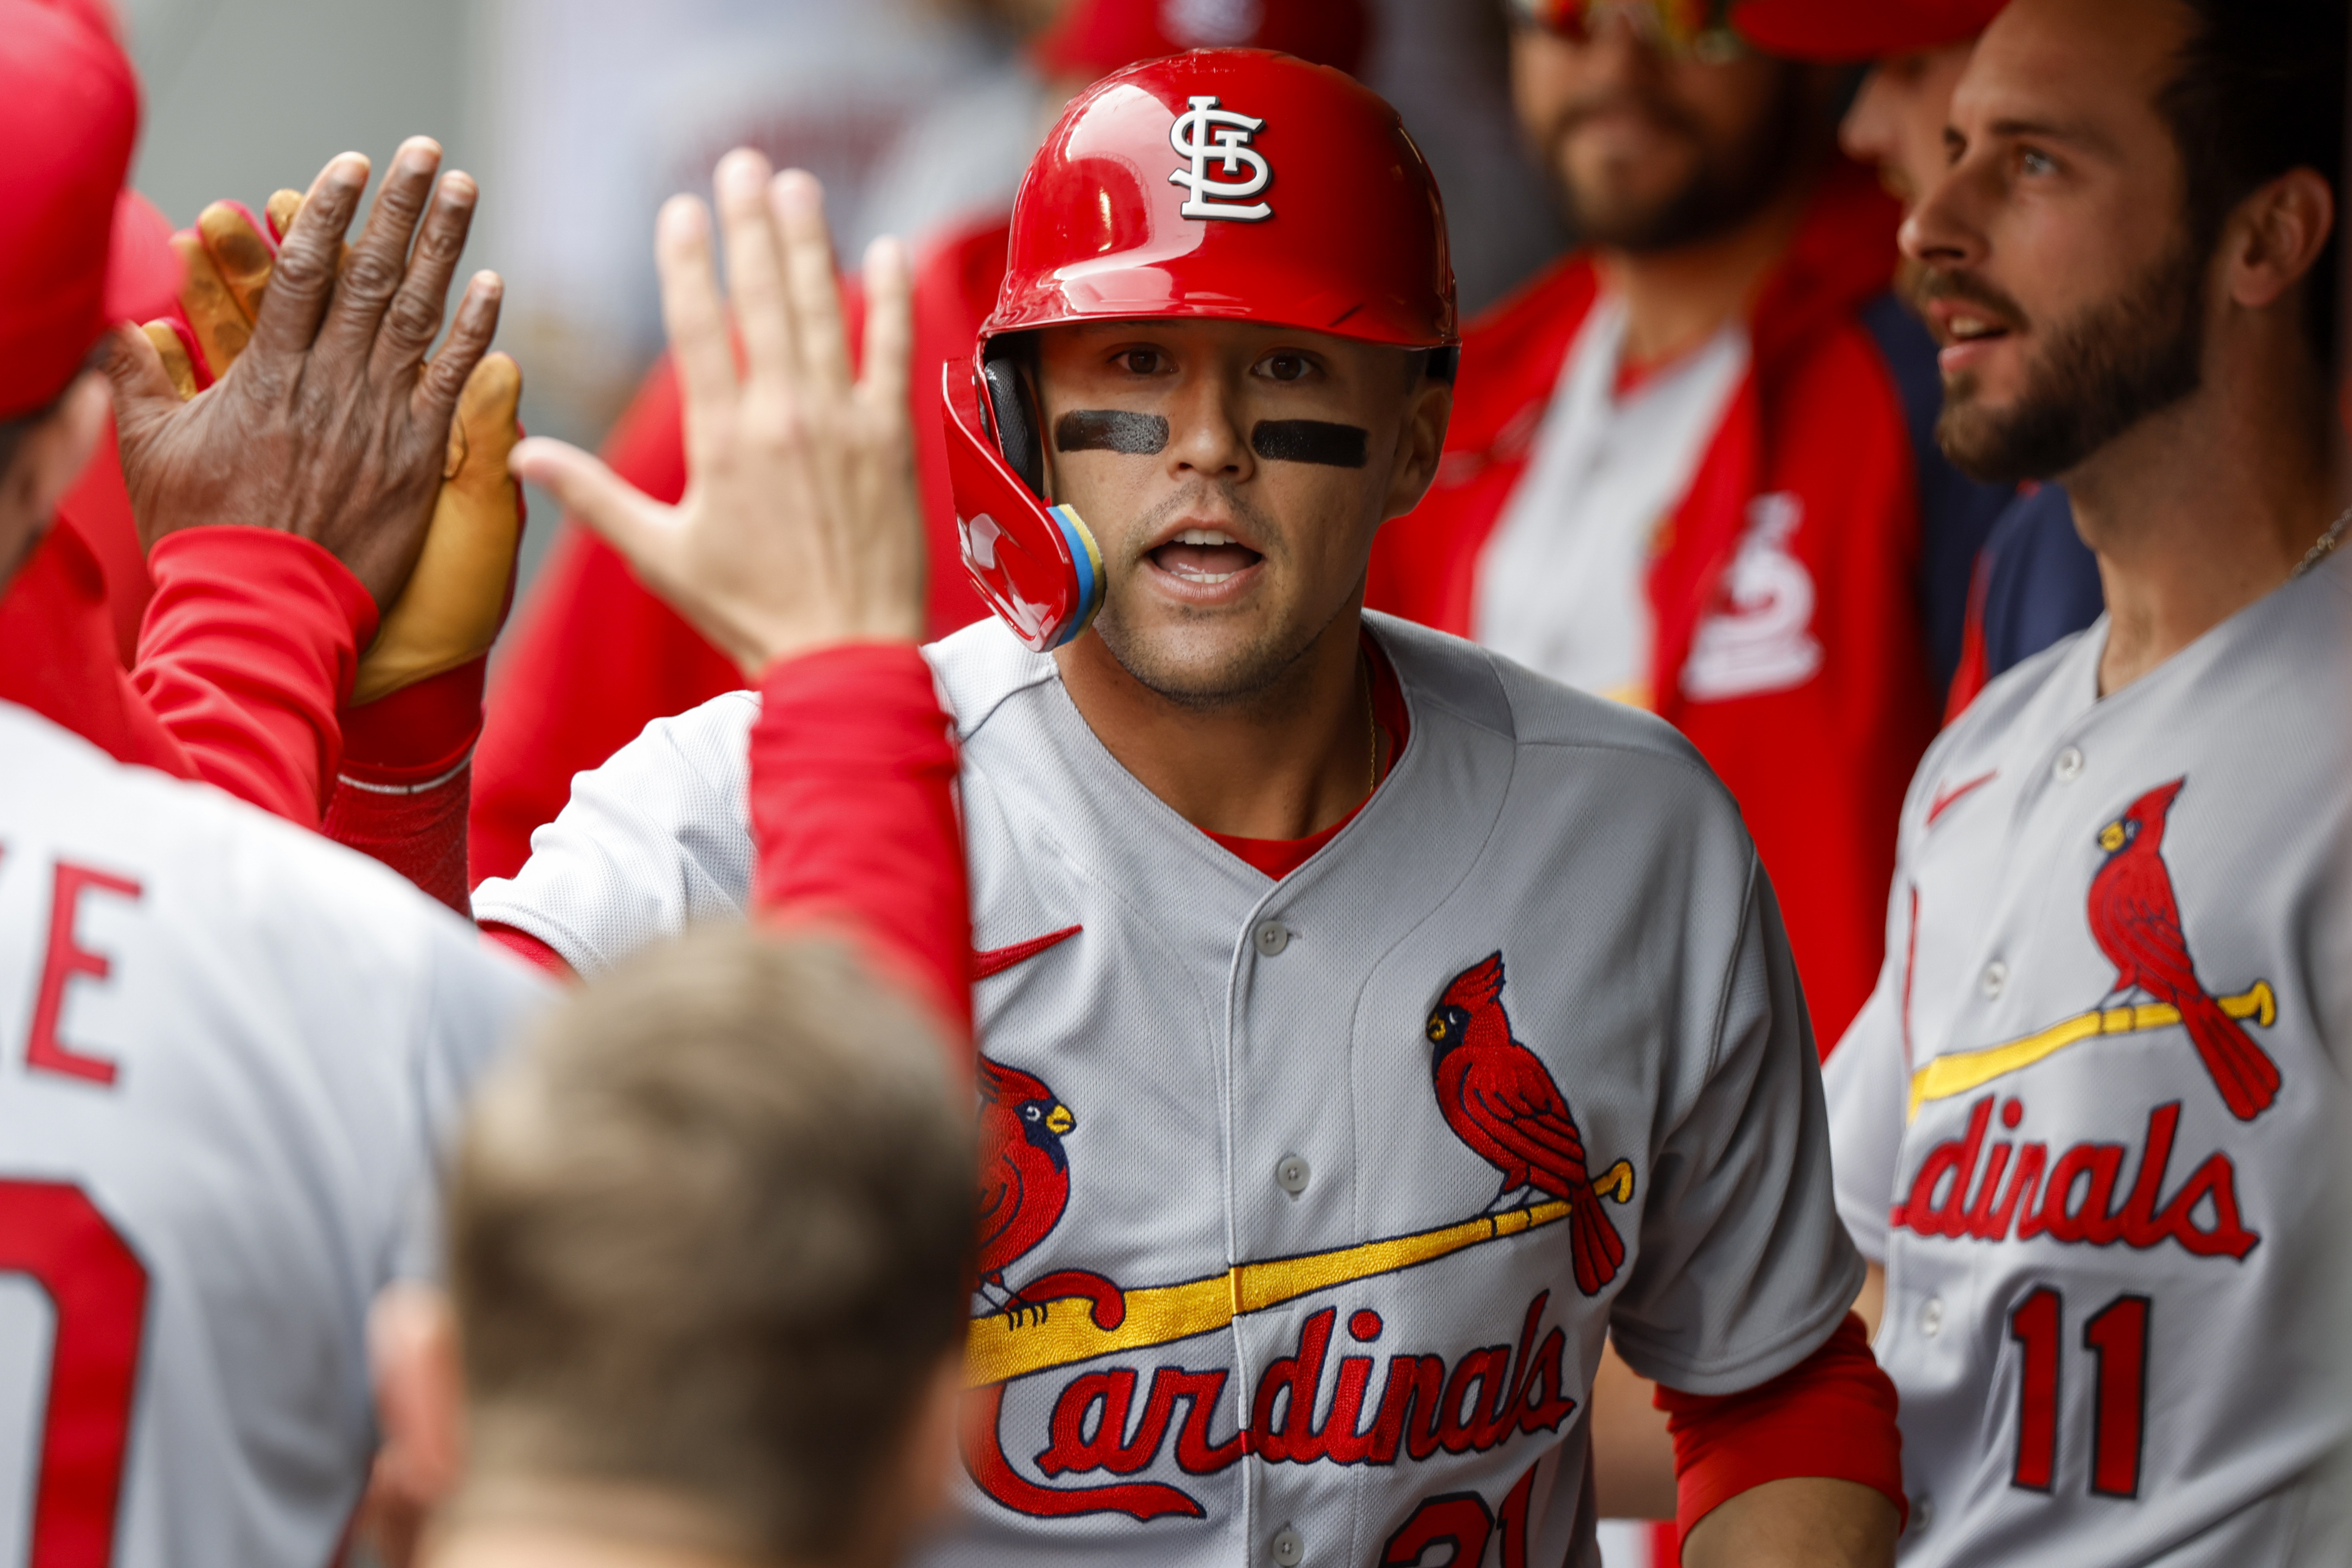 Home run fest powers Cardinals past Mariners